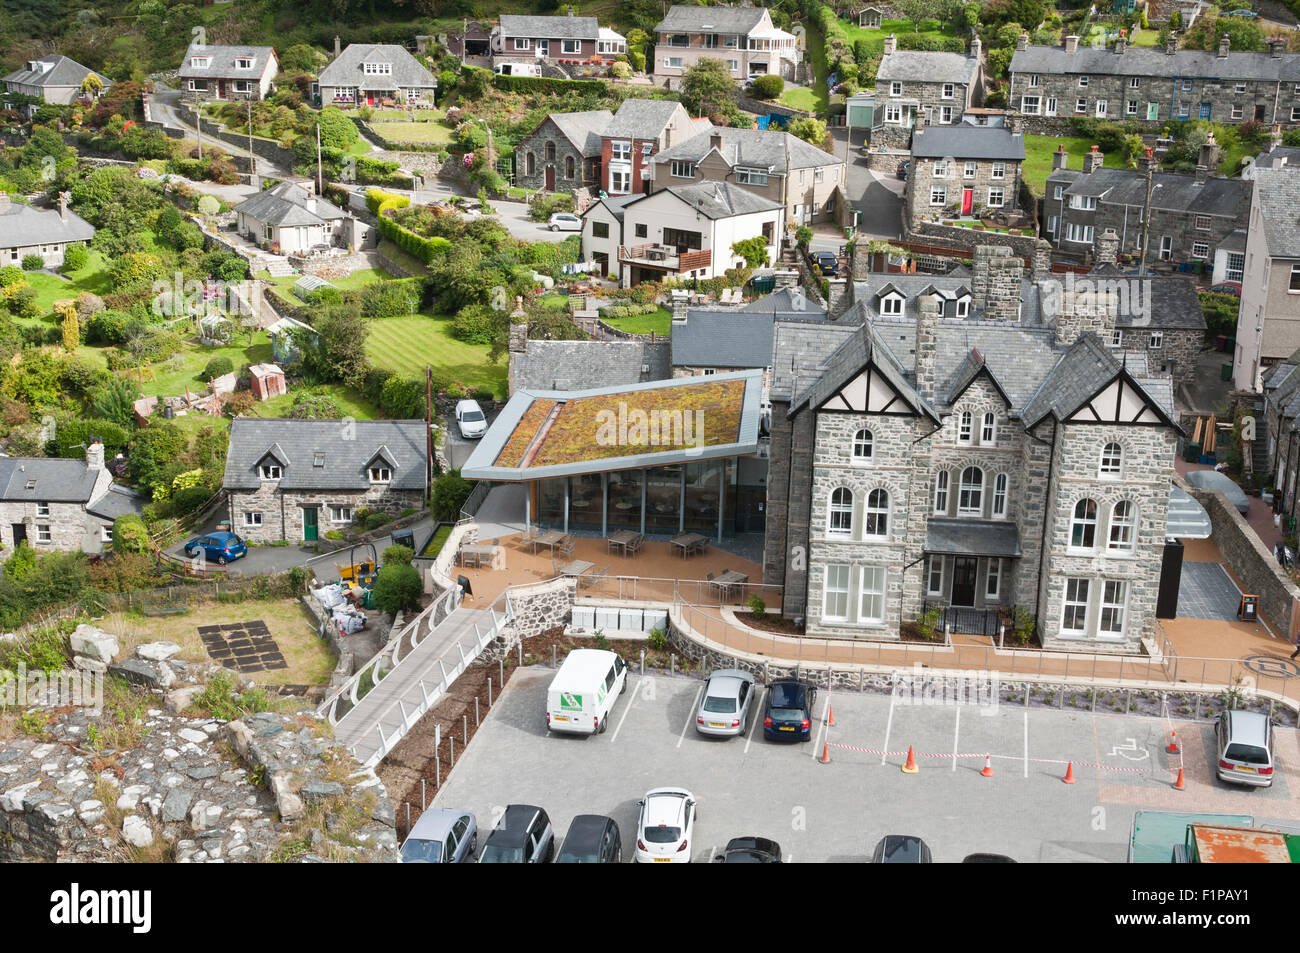 The new Harlech Castle visitor center and its cafe with a grass roof. The bottom floor of the old hotel is a visitor center. Stock Photo